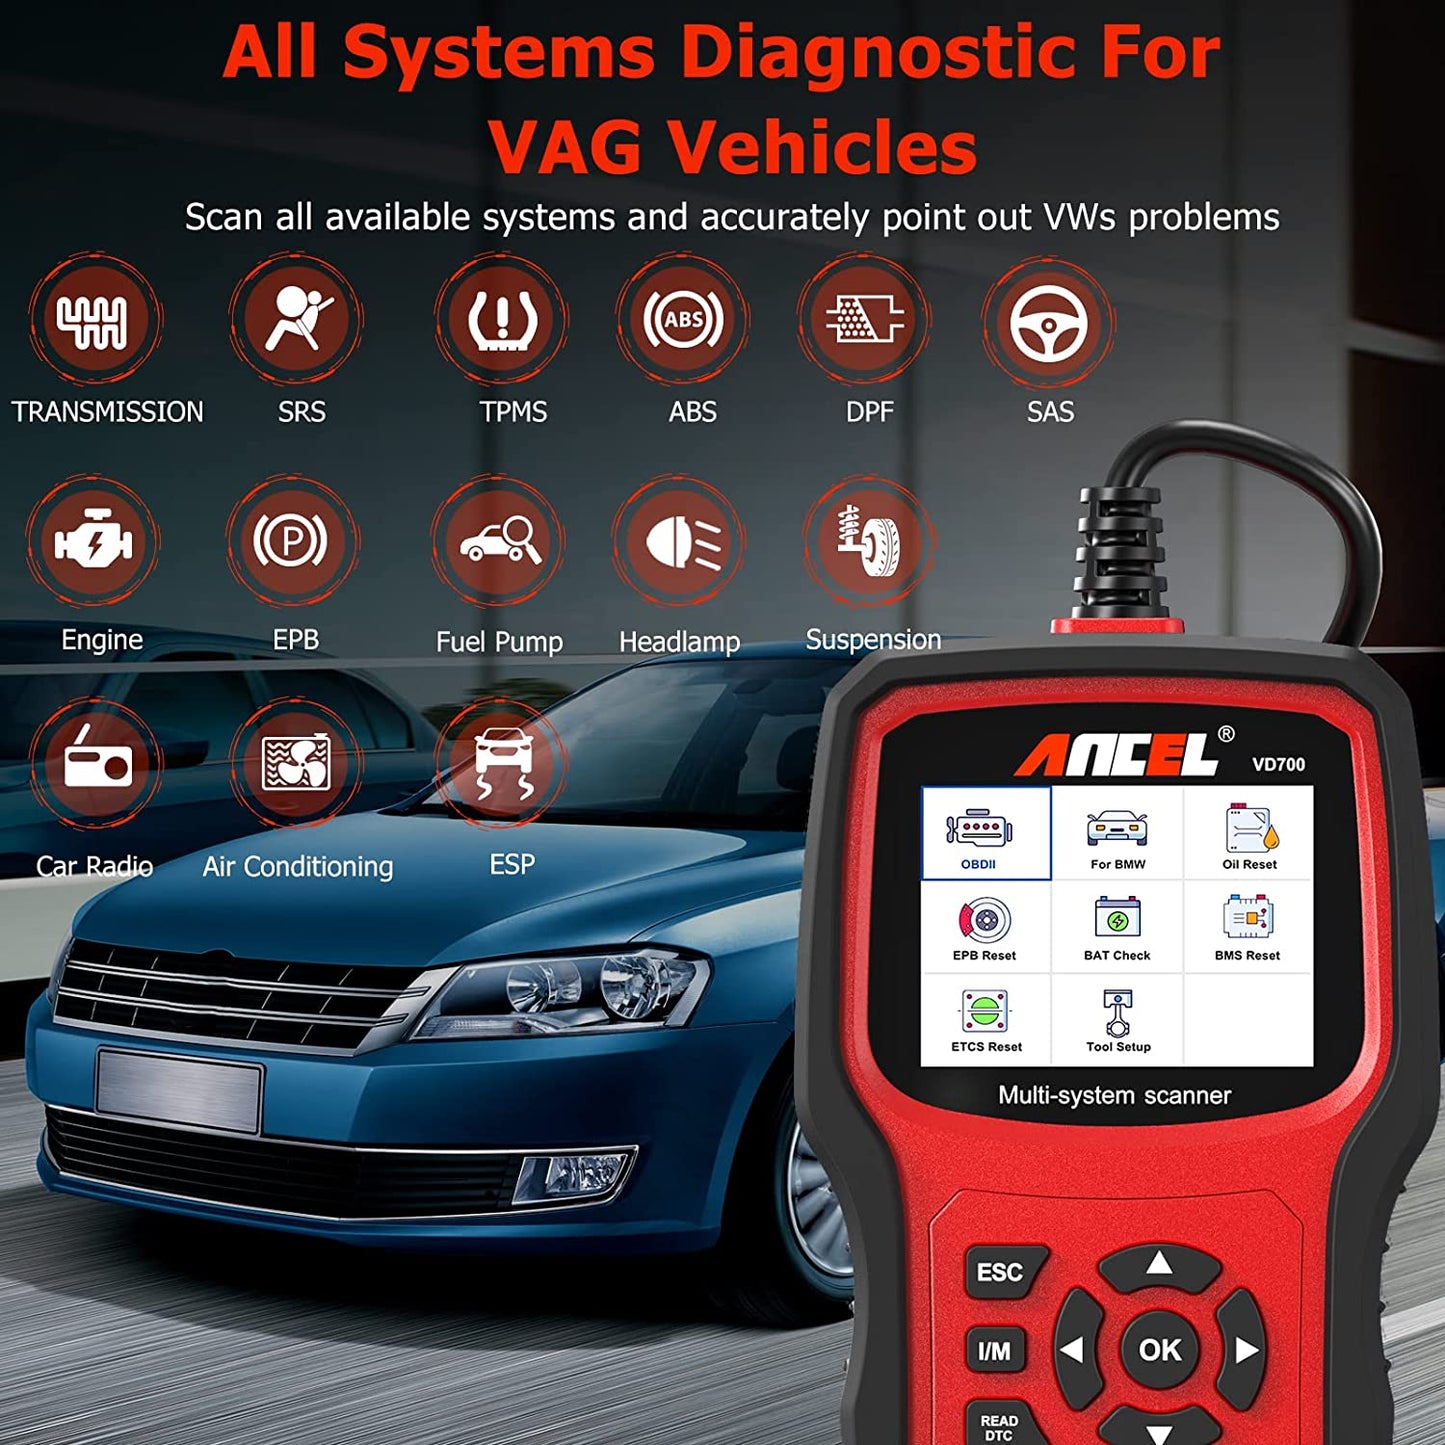 ANCEL VD700 All System OBD2 Scanner with 8 Special Functions for VAG Vehicles Diagnosis